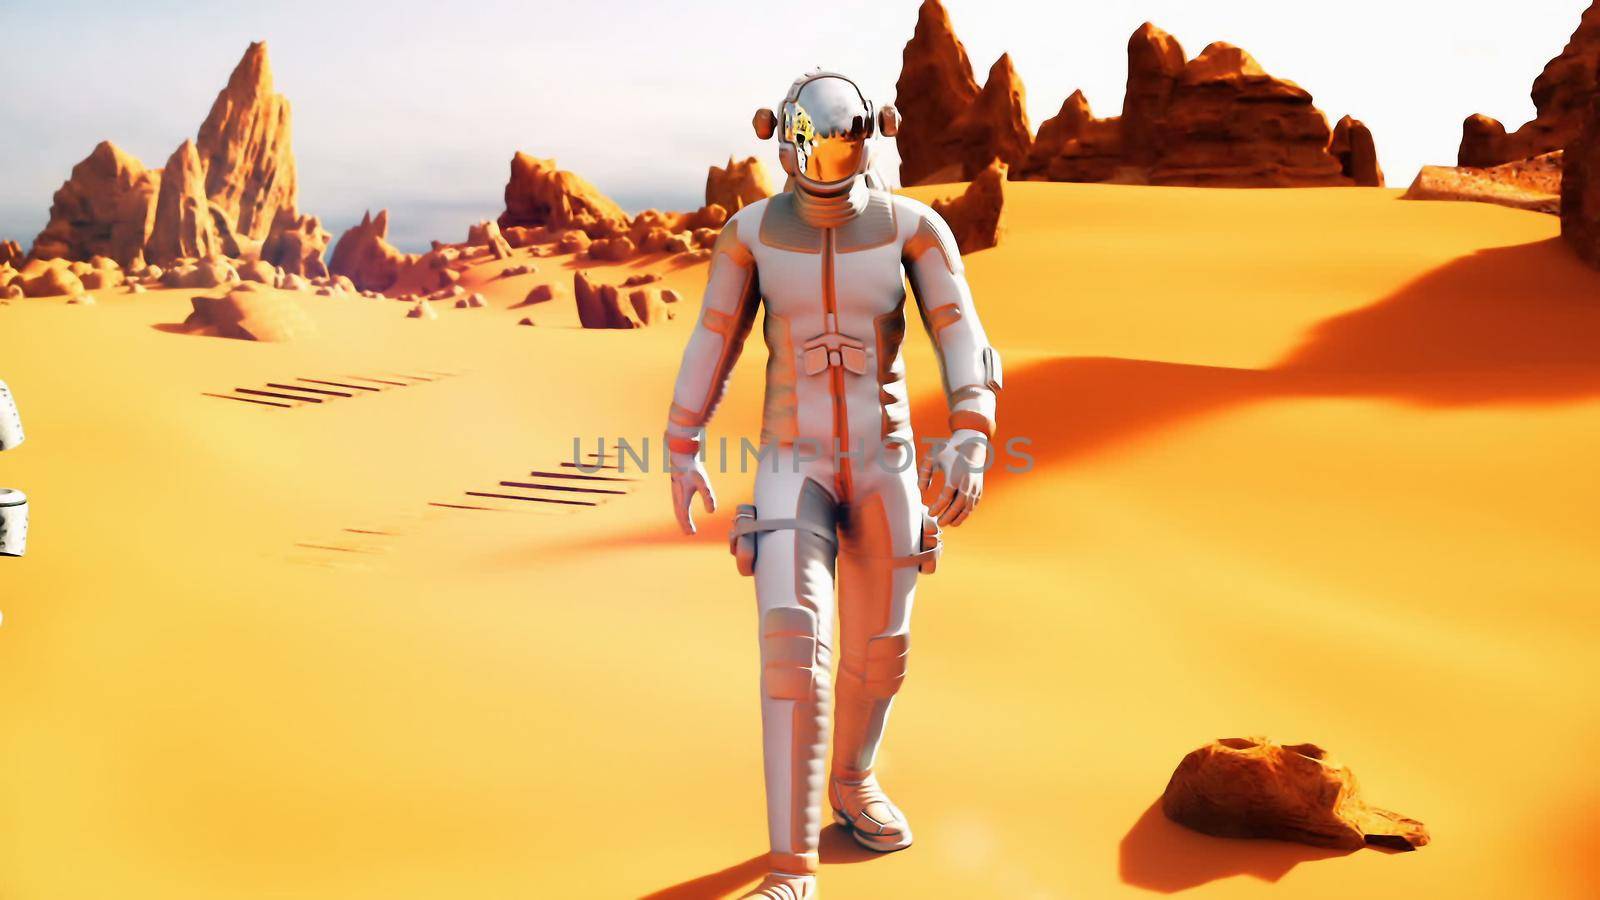 Astronaut on the Mars returns to his mars Rover after the exploration of planet.. 3D rendering by designprojects